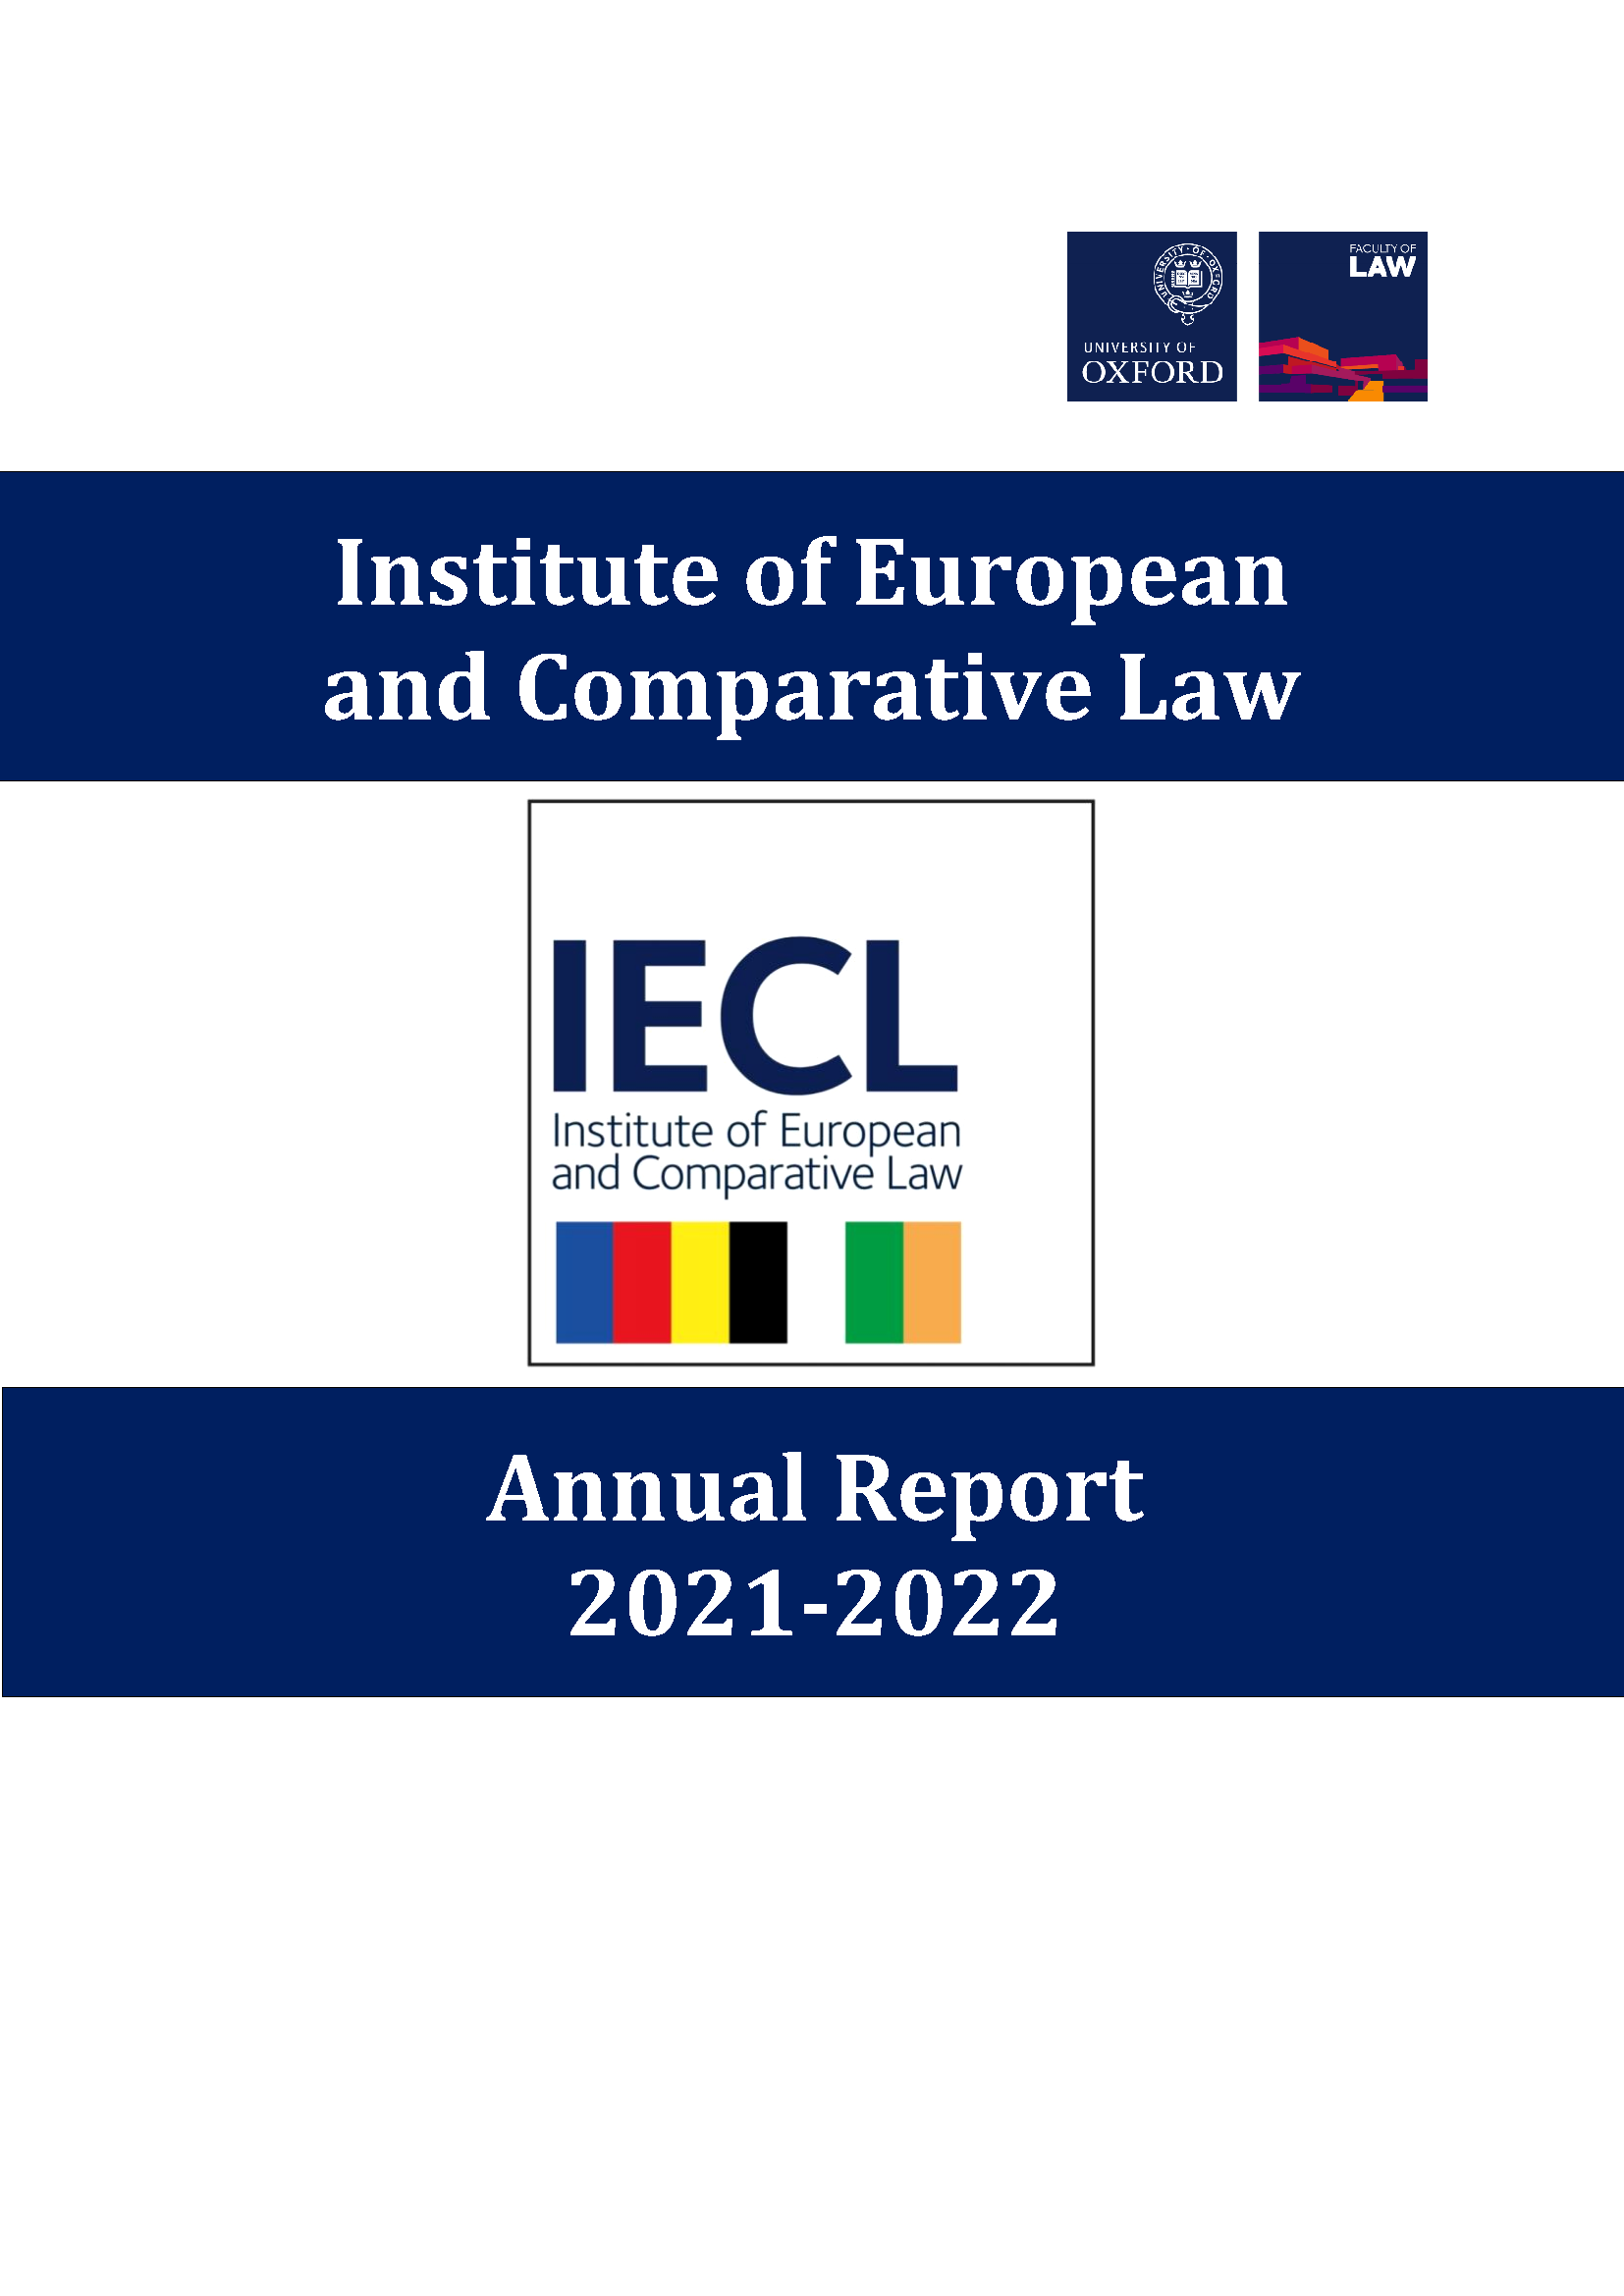 IECL Annual Report